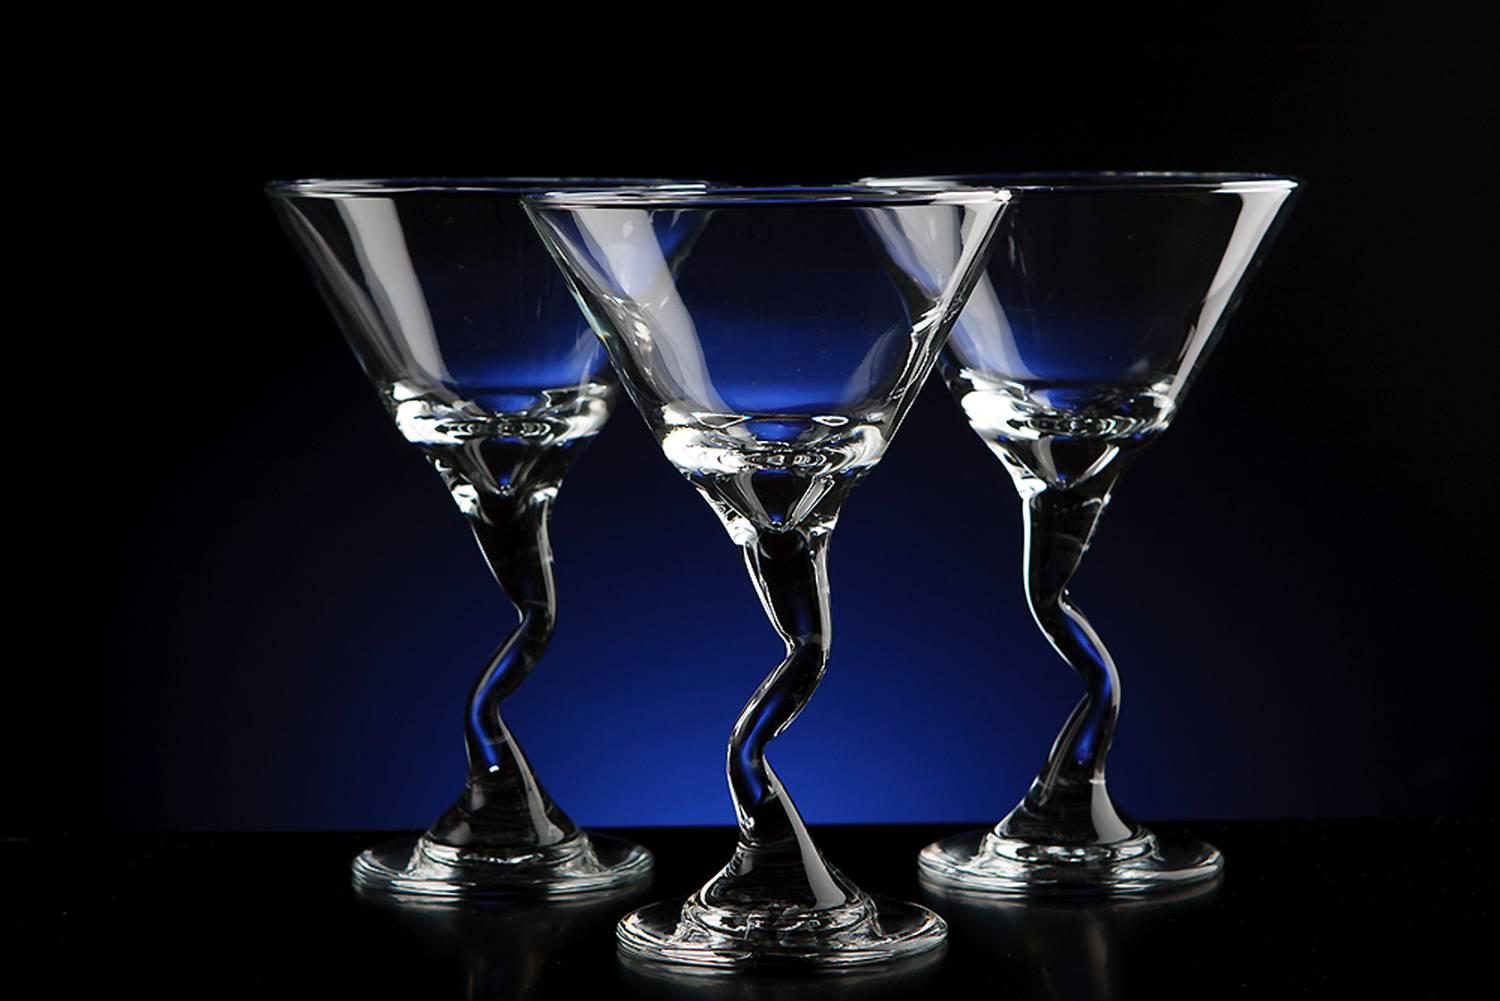 three martini glasses with crooked stems in front of a blue and black background